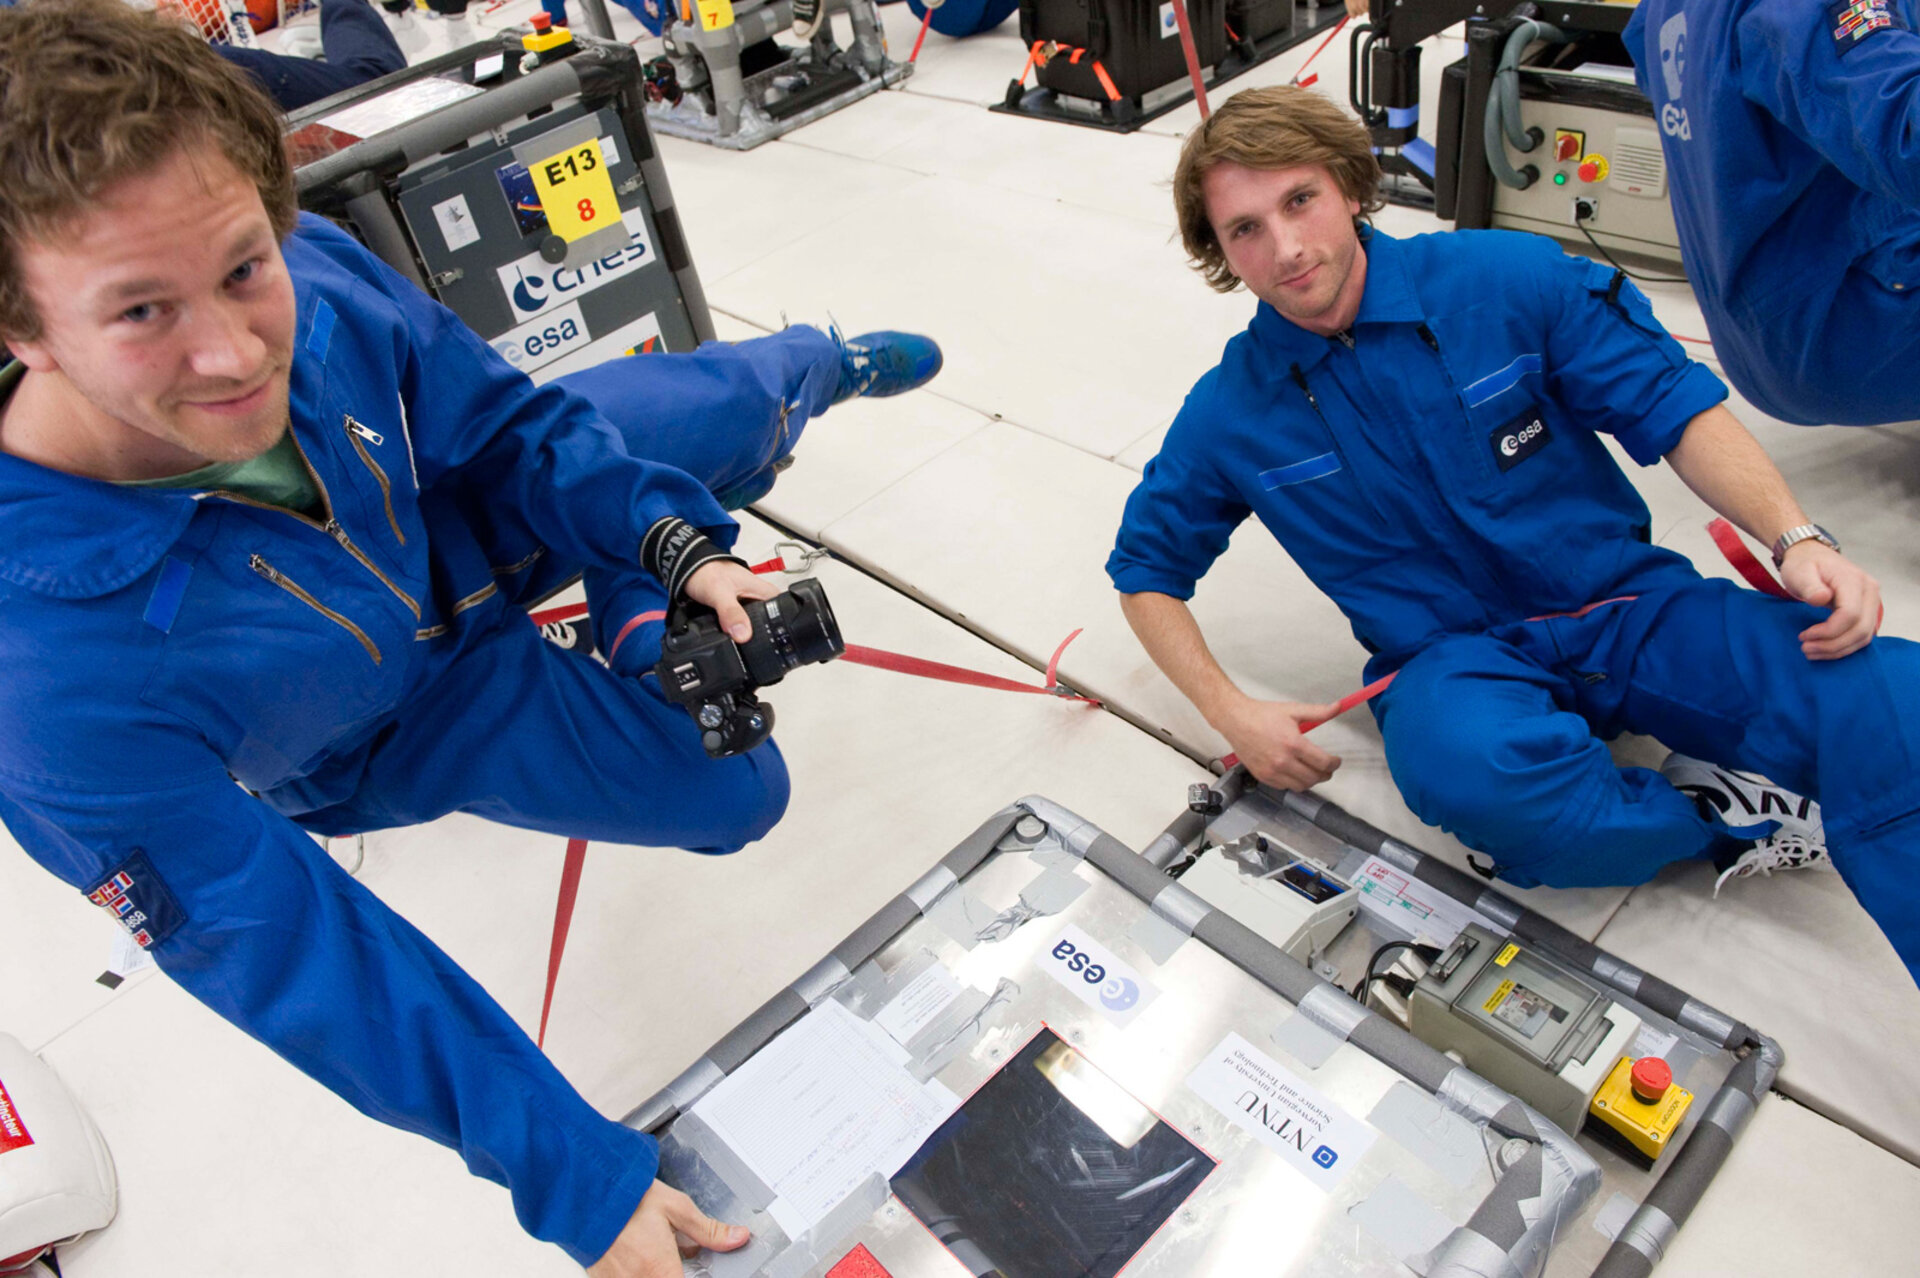 Students working in microgravity